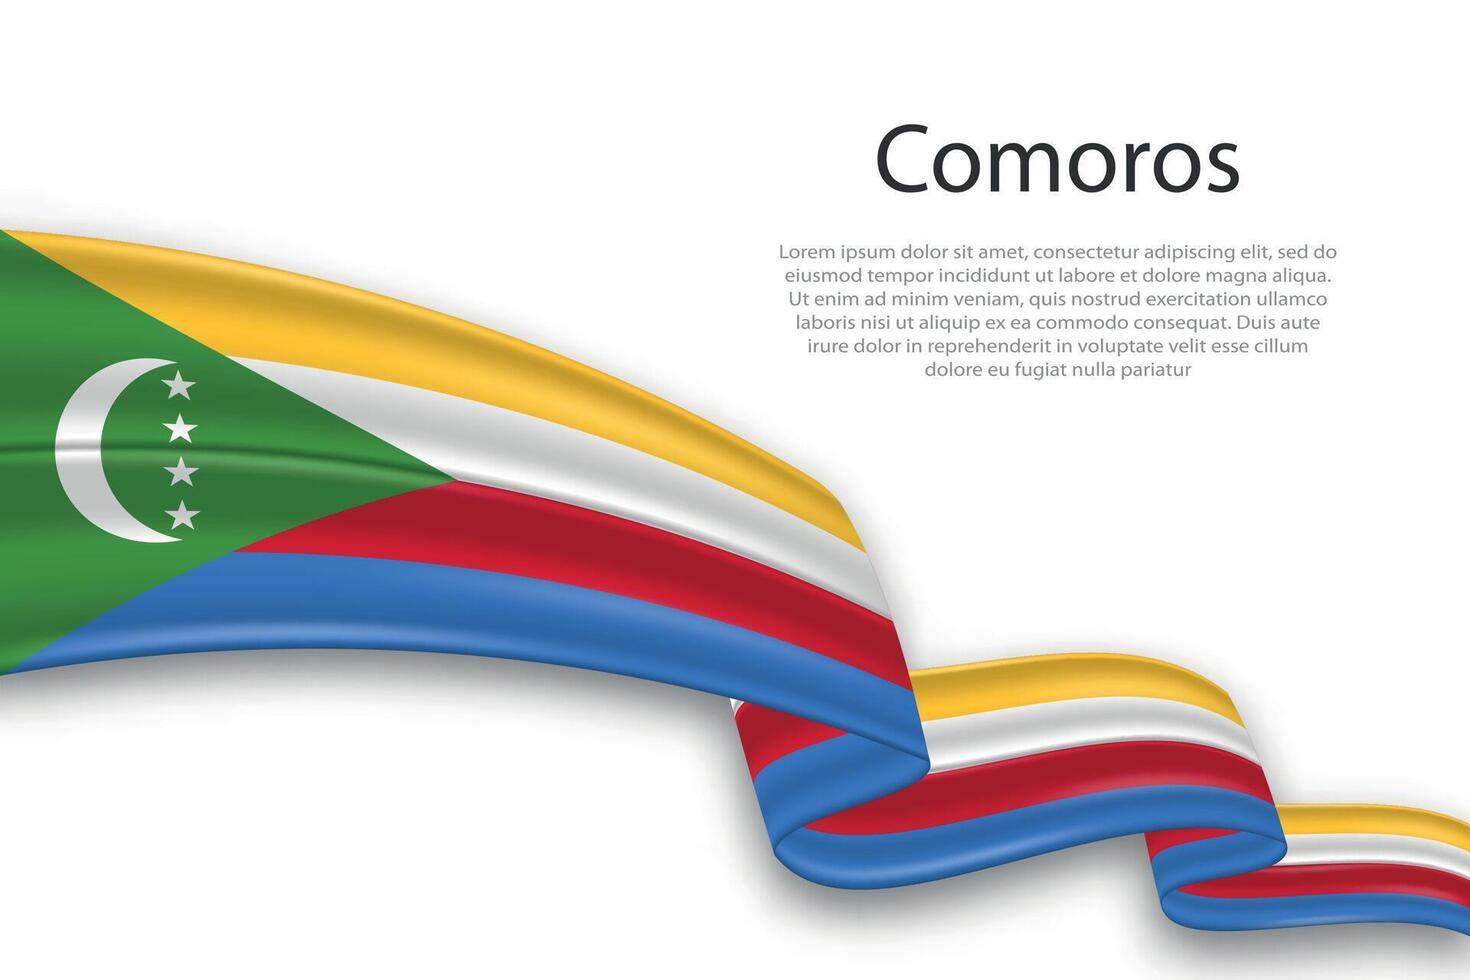 Abstract Wavy Flag of Comoros on White Background vector